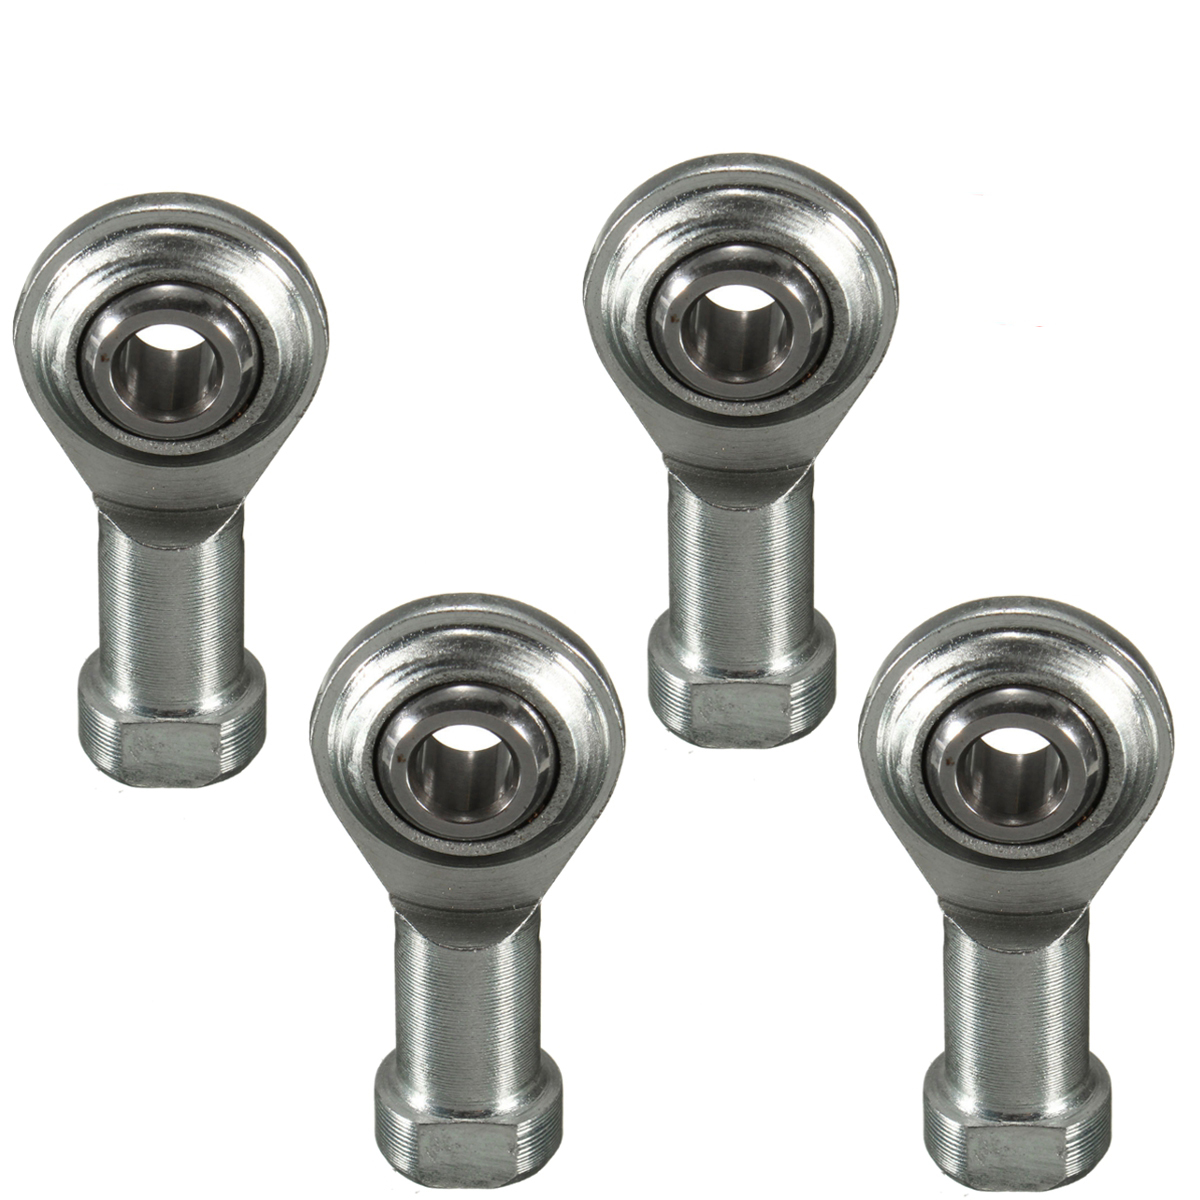 4pcs-M6-x-1mm-Right-Hand-Thread-Rod-End-Joint-Bearing-6mm-Female-Thread-Joint-Ball-Bearing-1586681-2